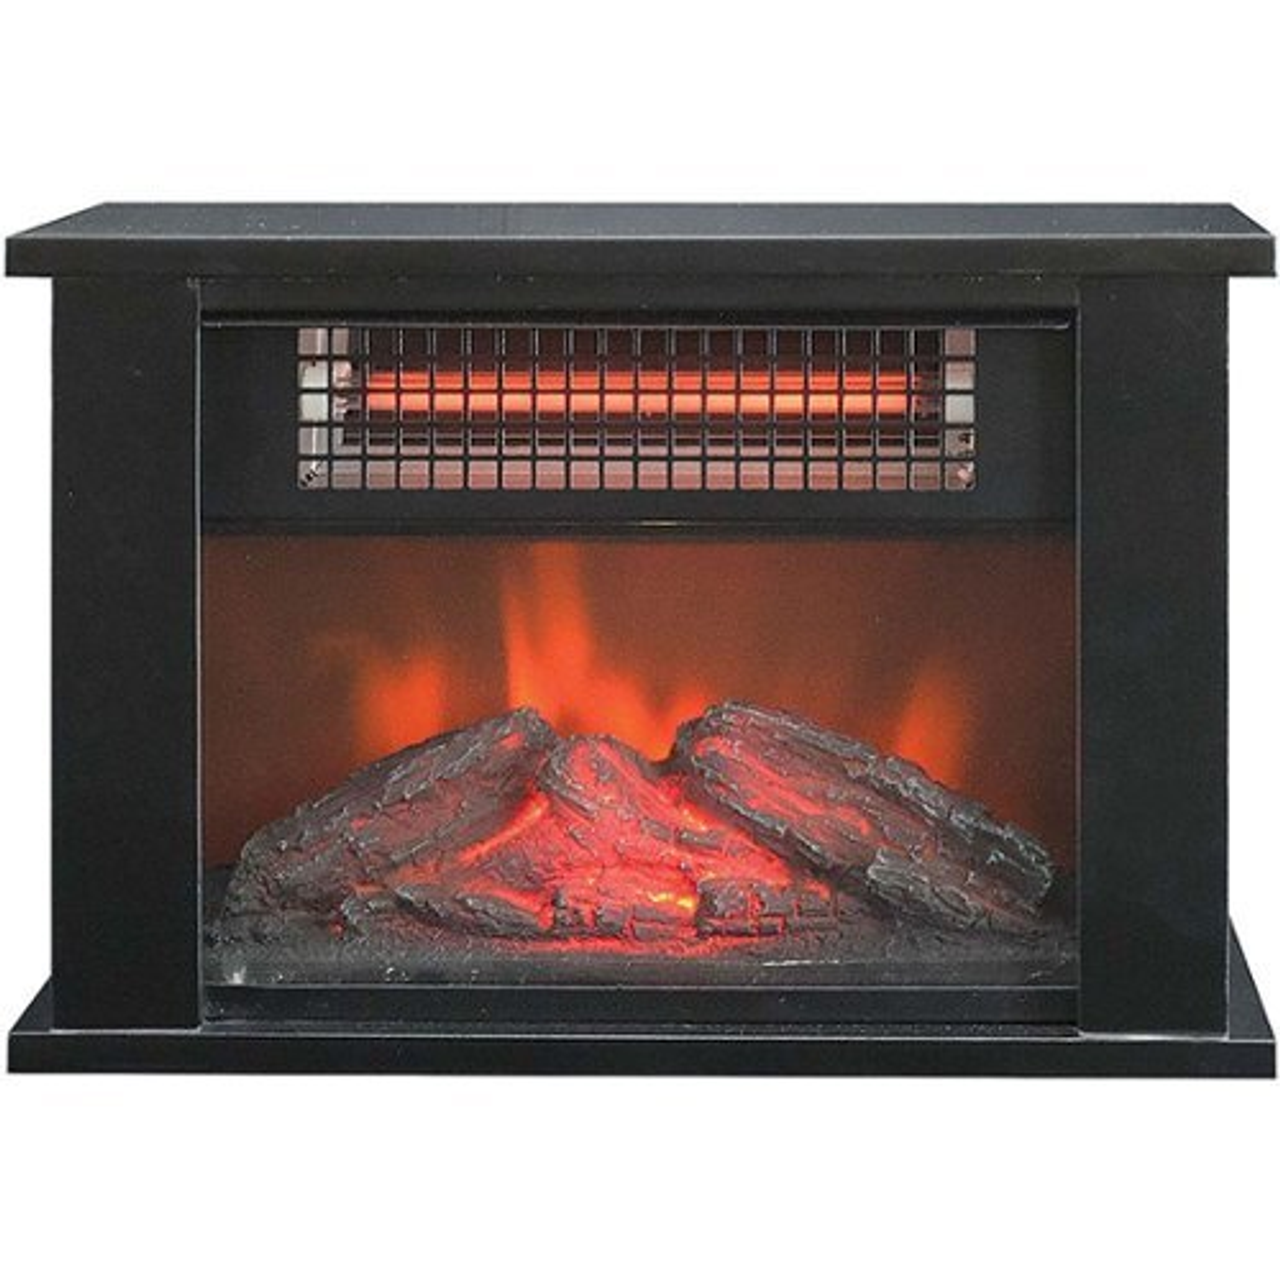 Lifesmart - 1000W Tabletop Infrared Fireplace Space Heater - Black